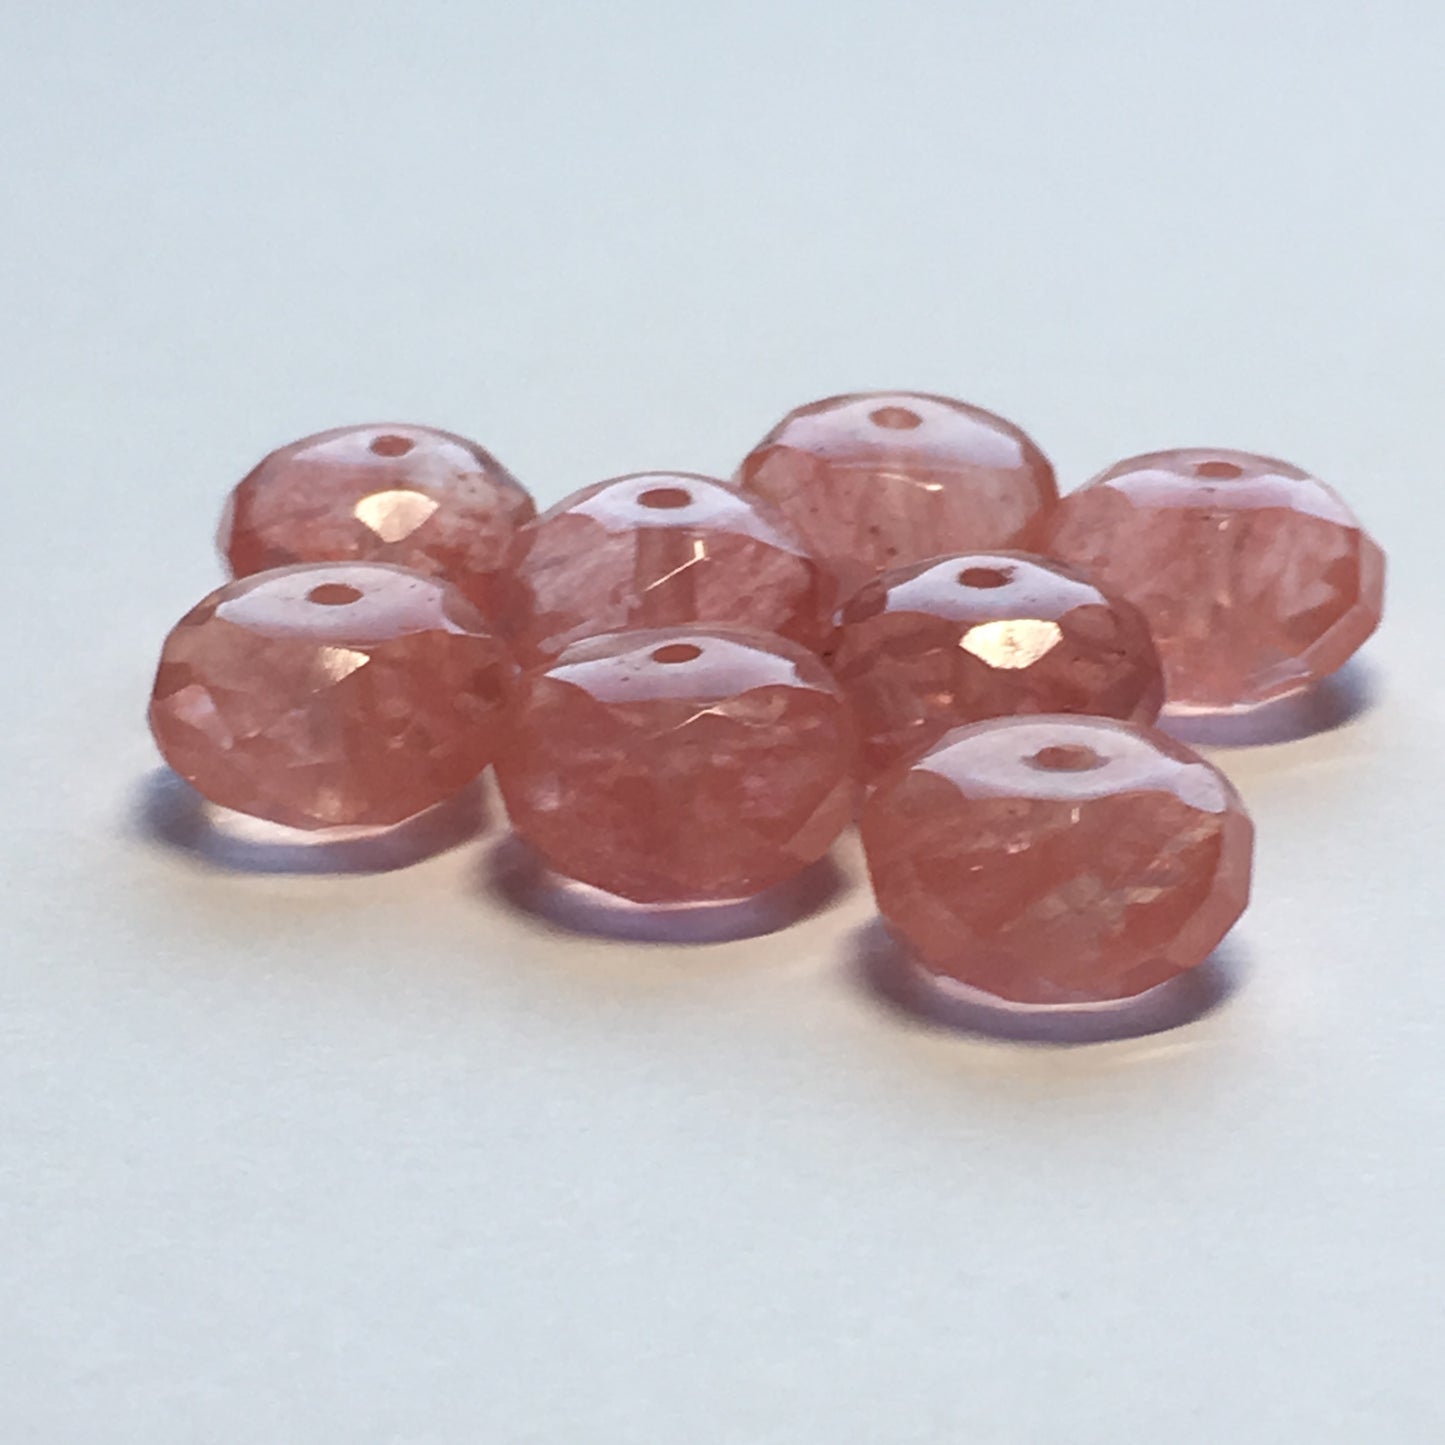 Transparent Pink Swirl Glass Faceted Rondelle Beads, 7 x 10 mm, 8 Beads